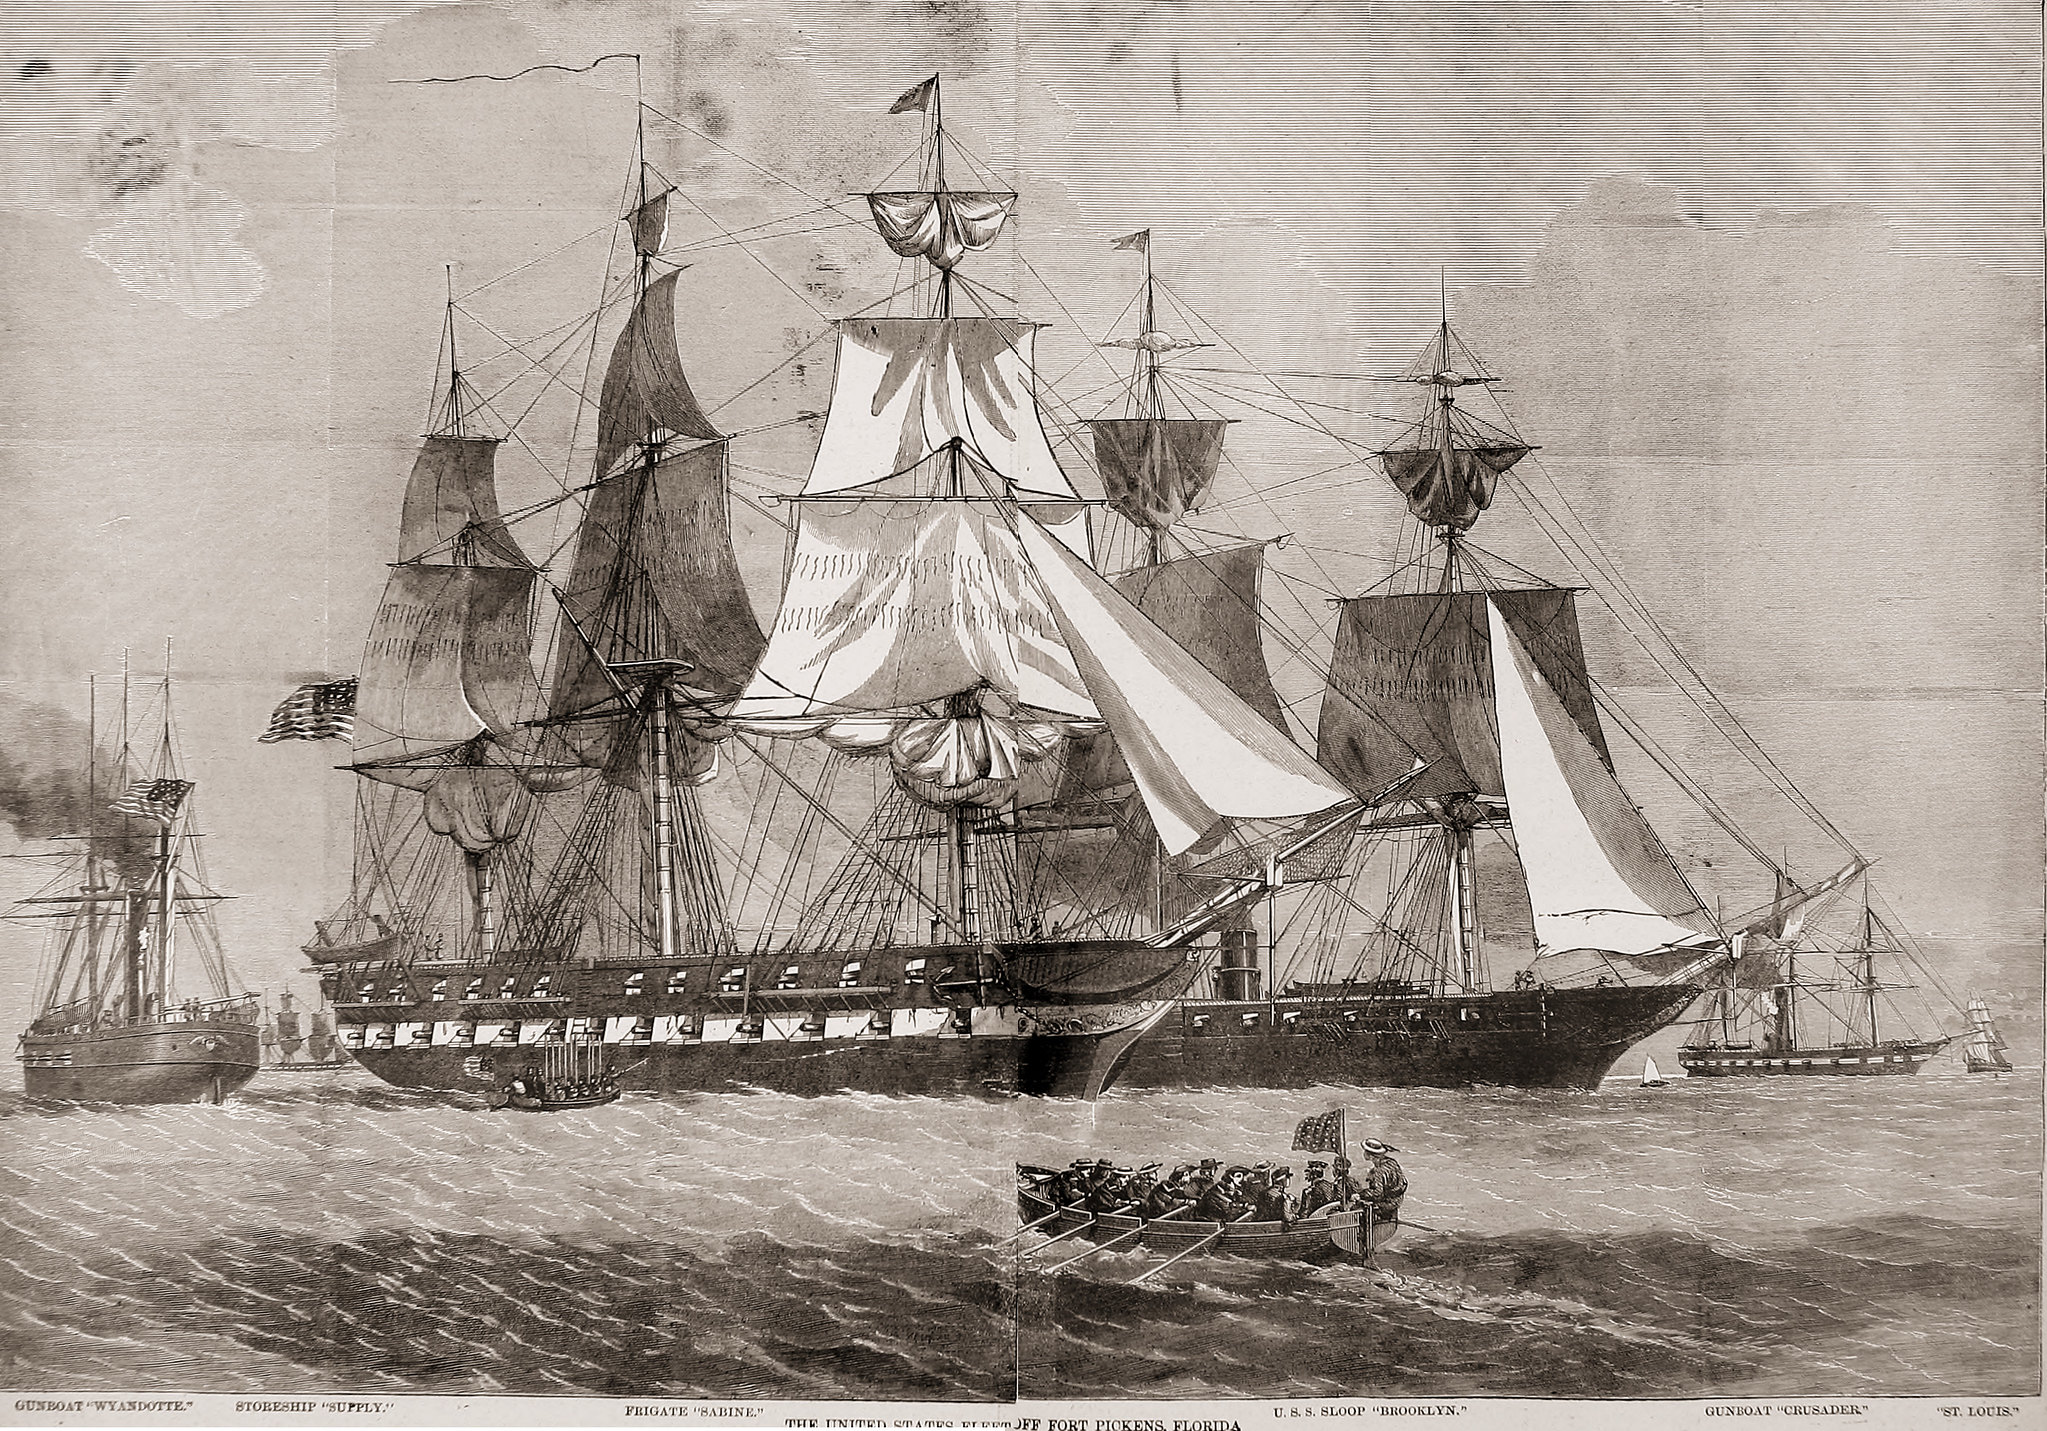 The United States Fleet Off Fort Pickens, Florida, April 1861